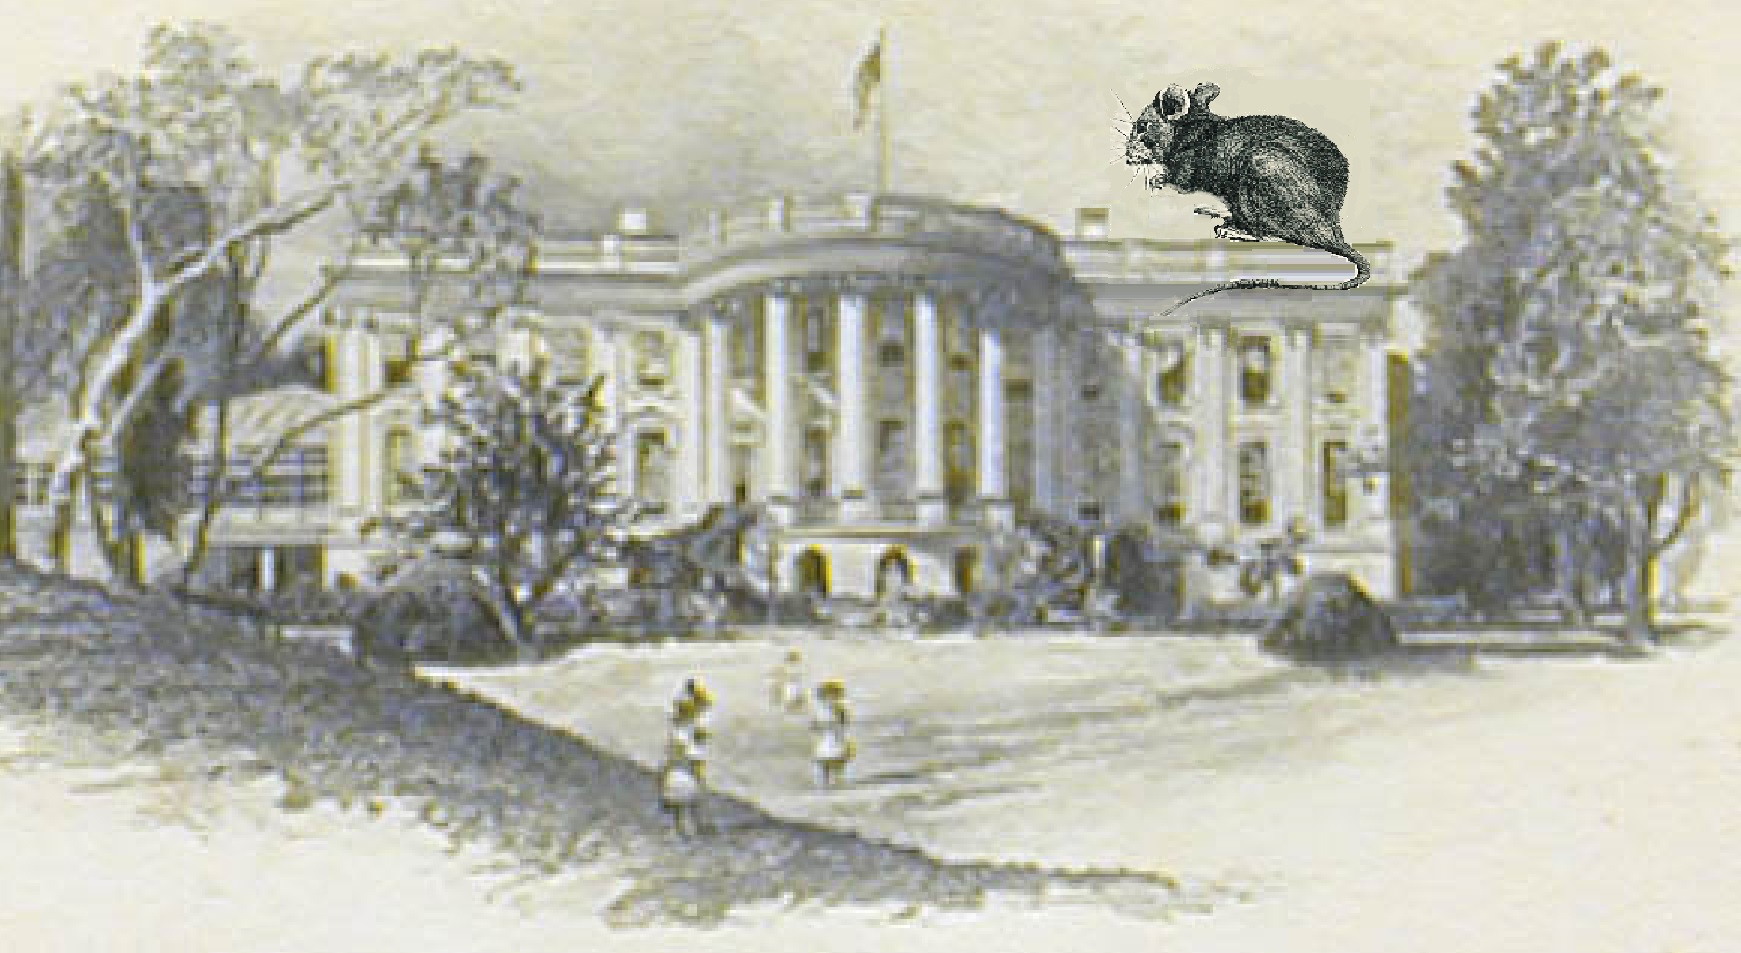 Rats can't help getting into the White House.